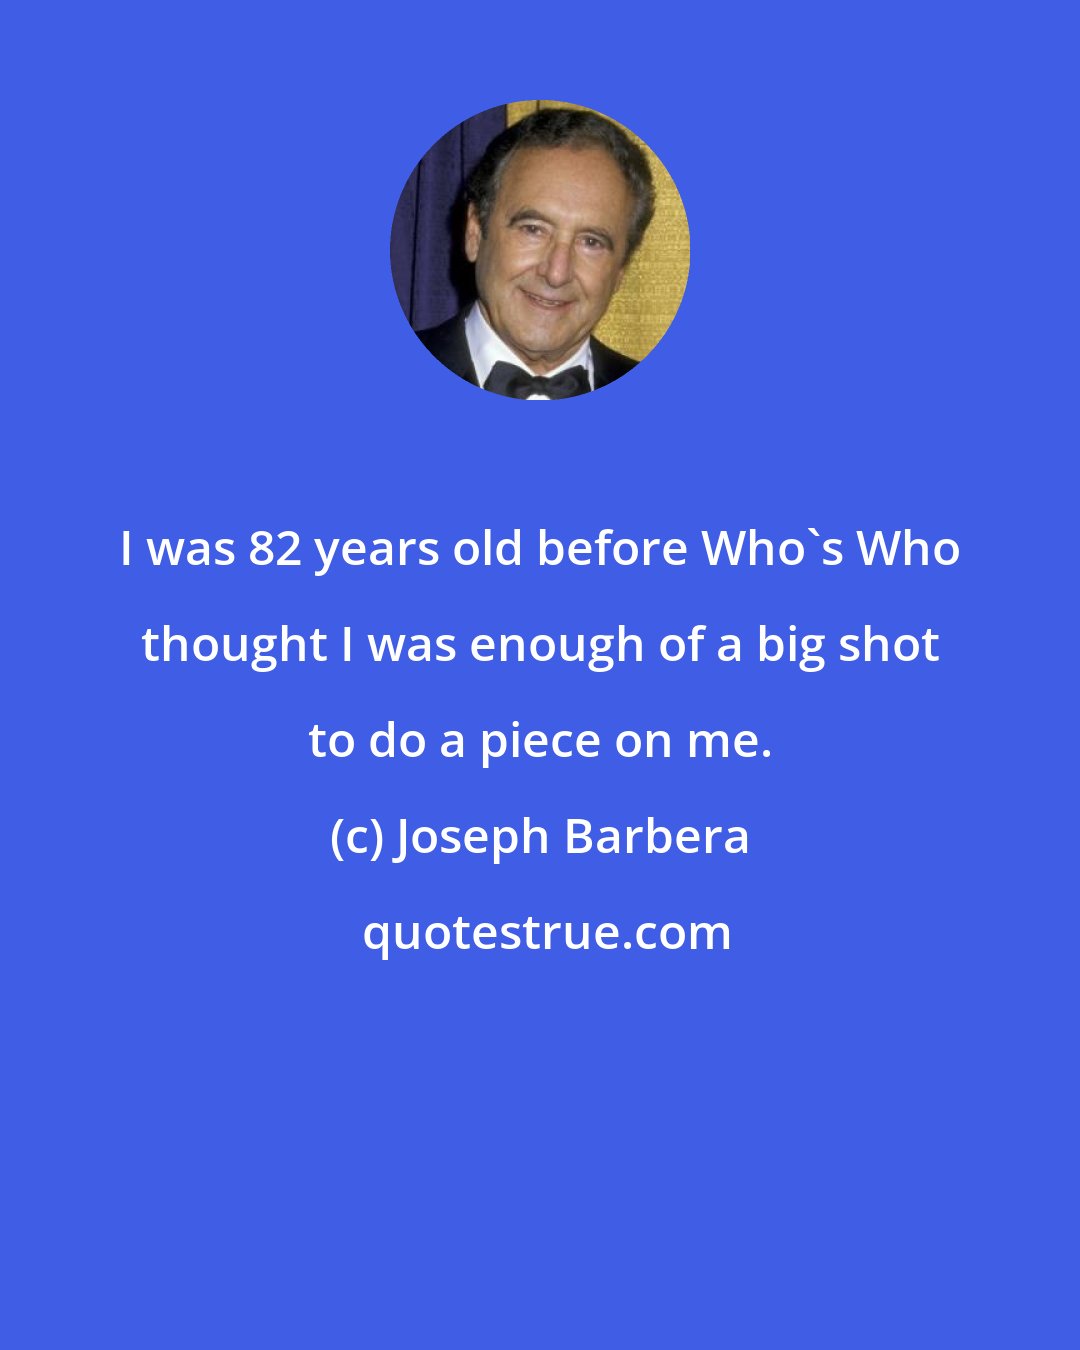 Joseph Barbera: I was 82 years old before Who's Who thought I was enough of a big shot to do a piece on me.